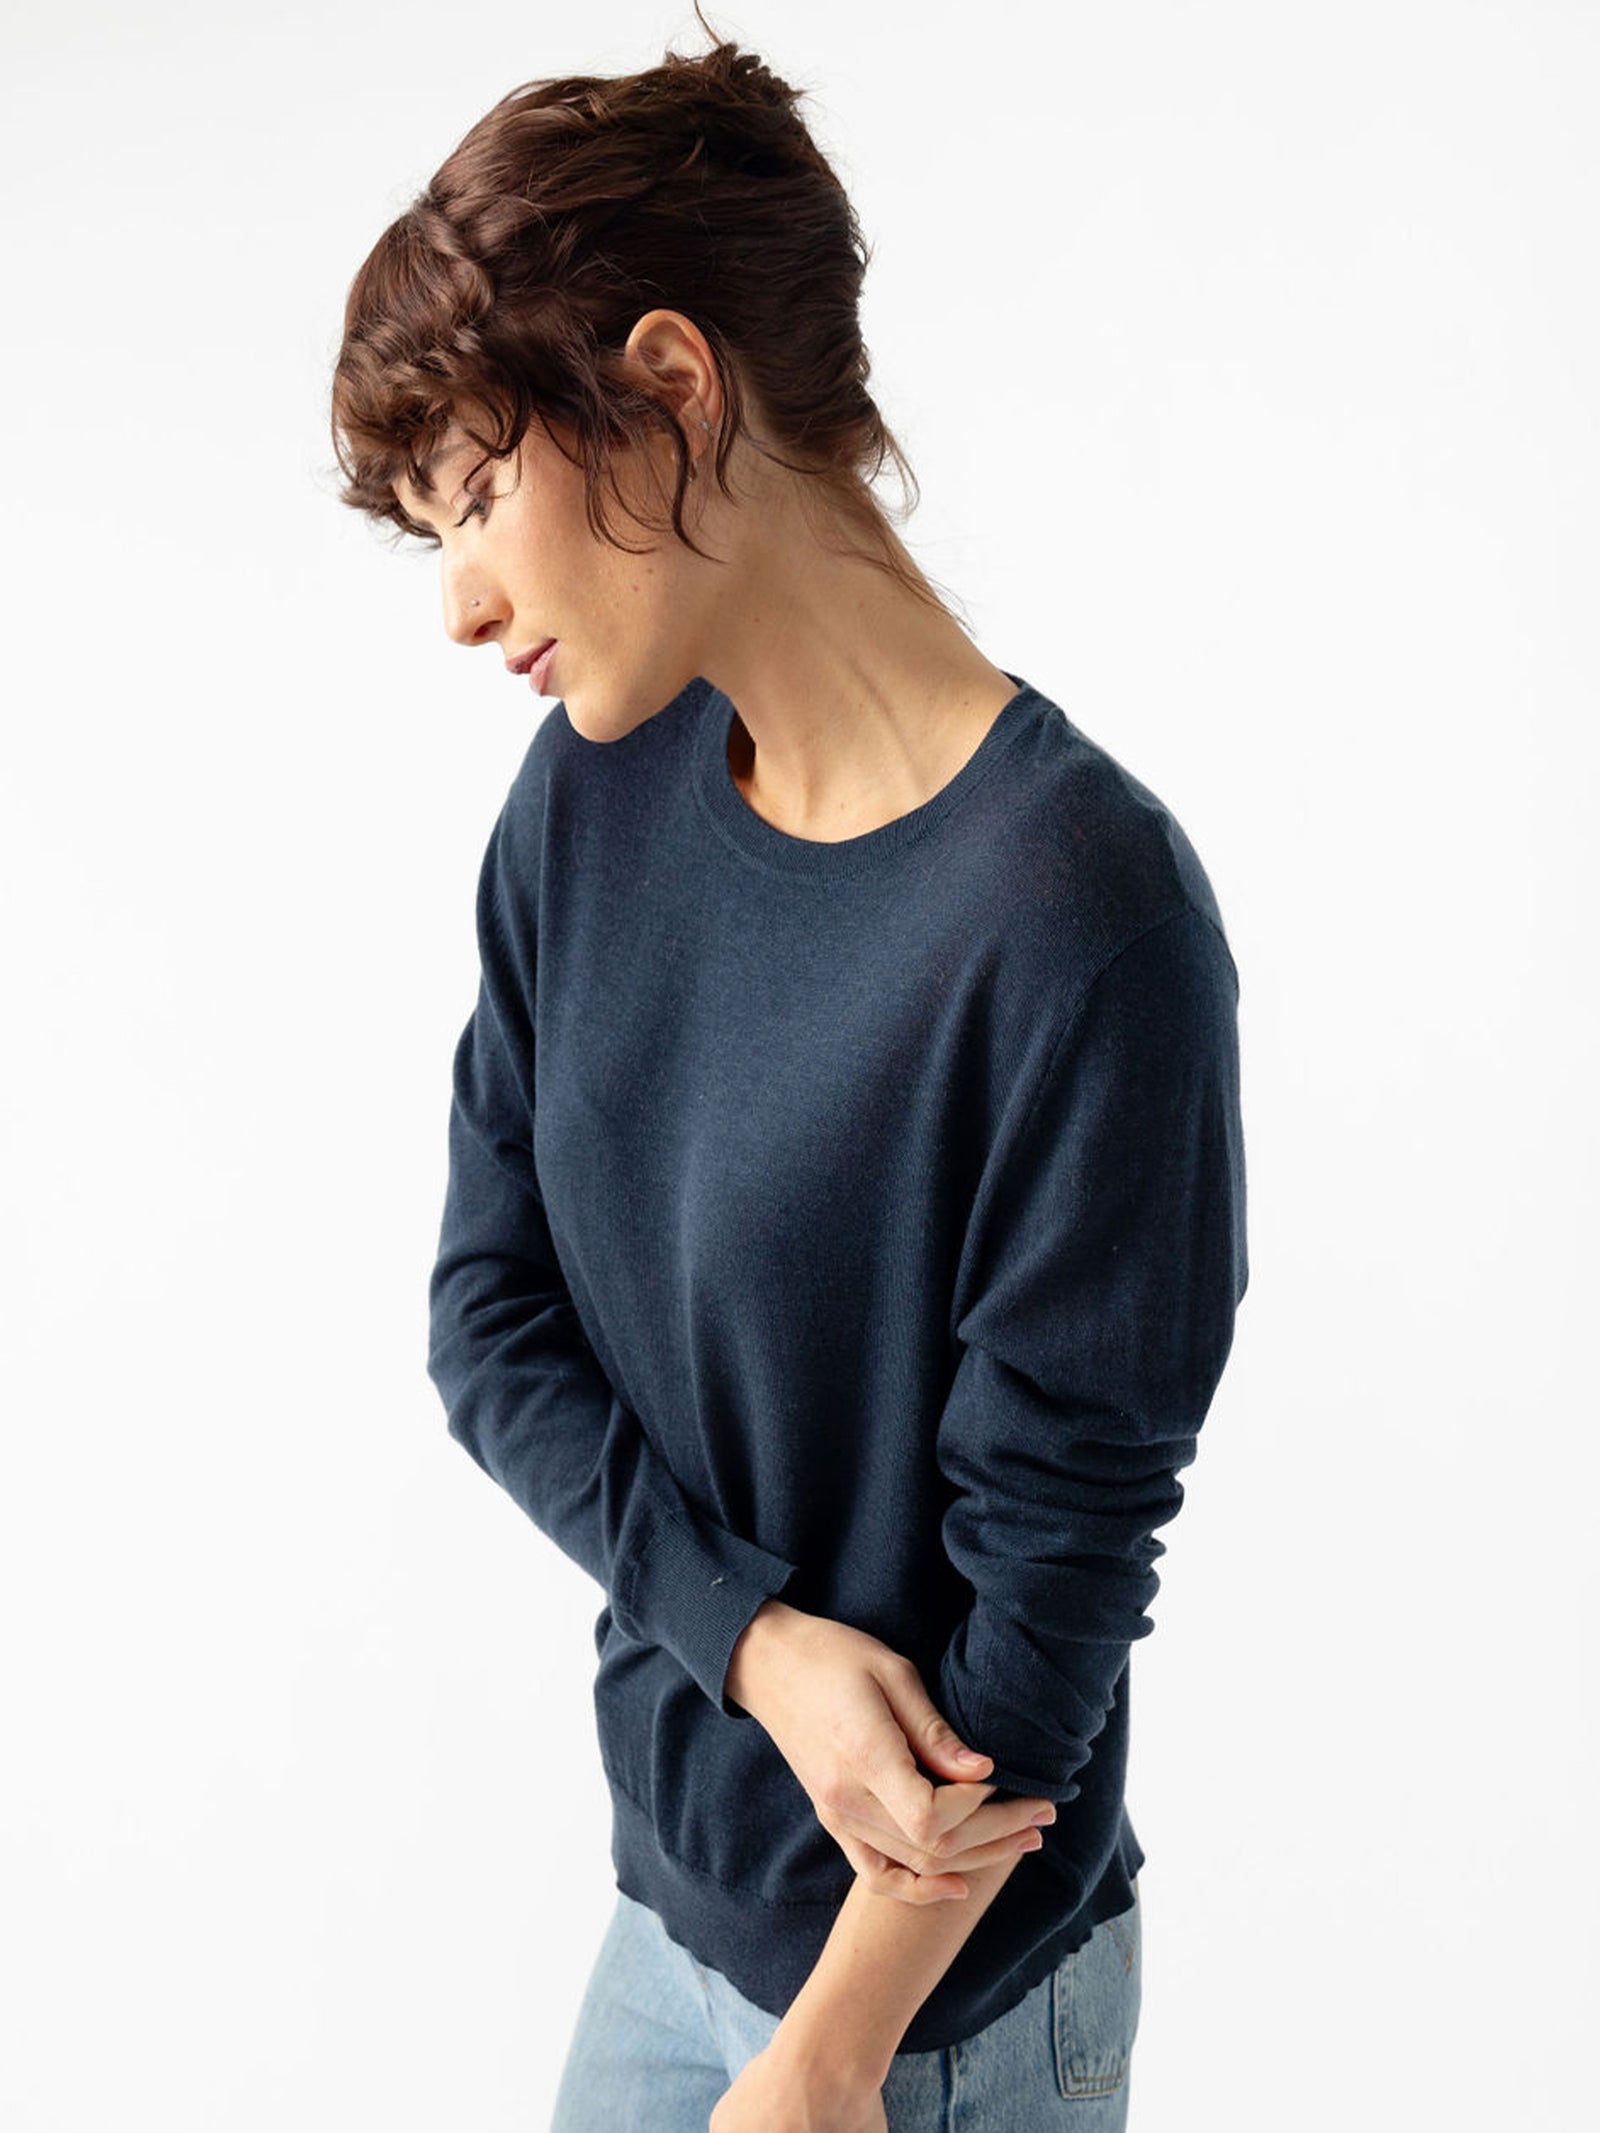 Side view of woman wearing jeans and an eclipse airknit sweater with white background 